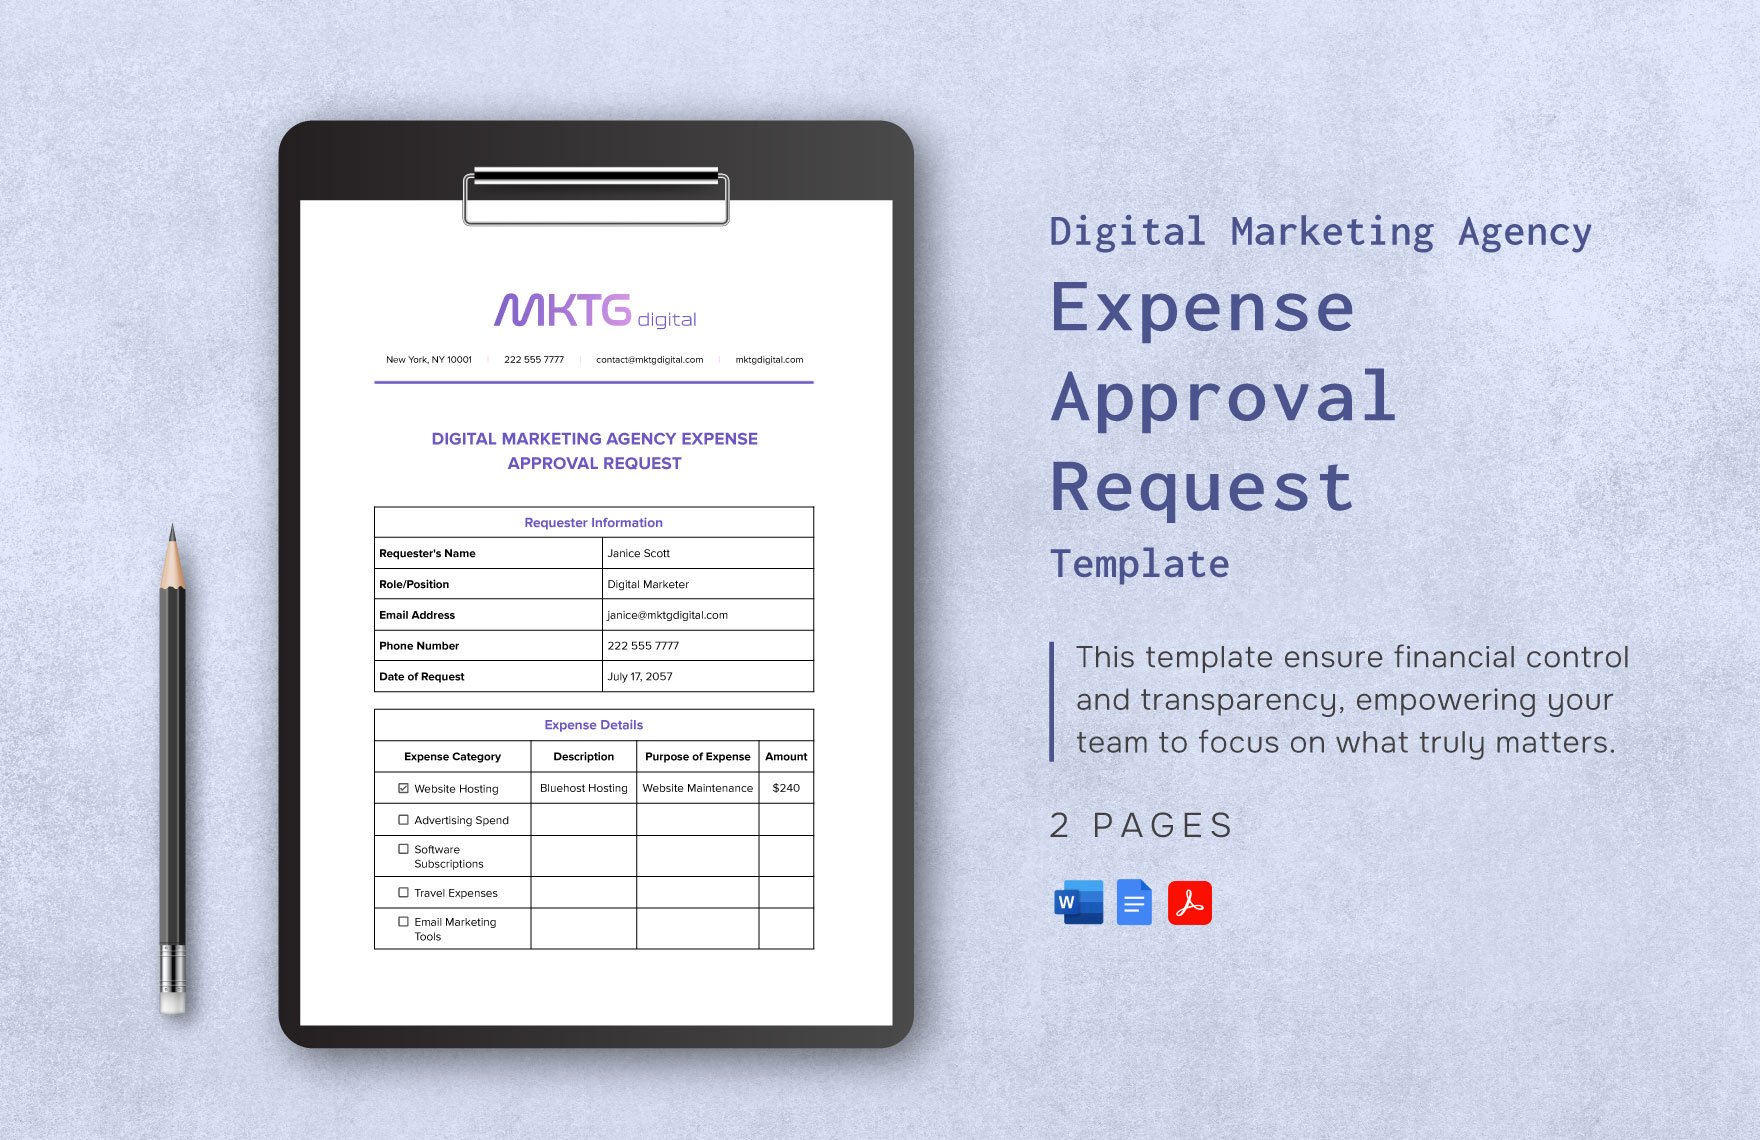 Digital Marketing Agency Expense Approval Request Template in Word, Google Docs, PDF